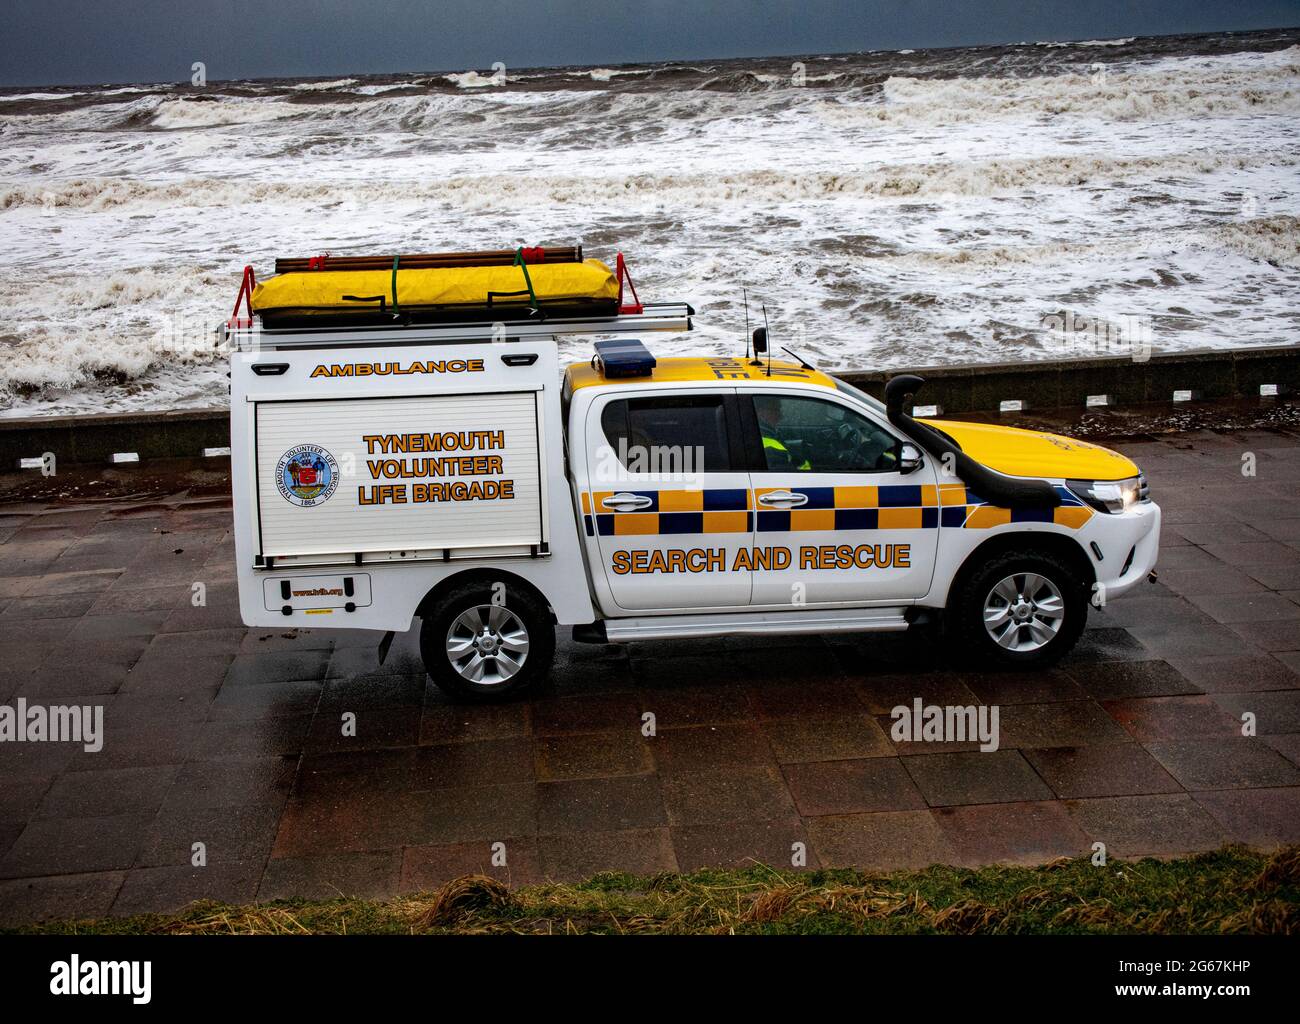 Search and rescue vehicle at the coast Stock Photo